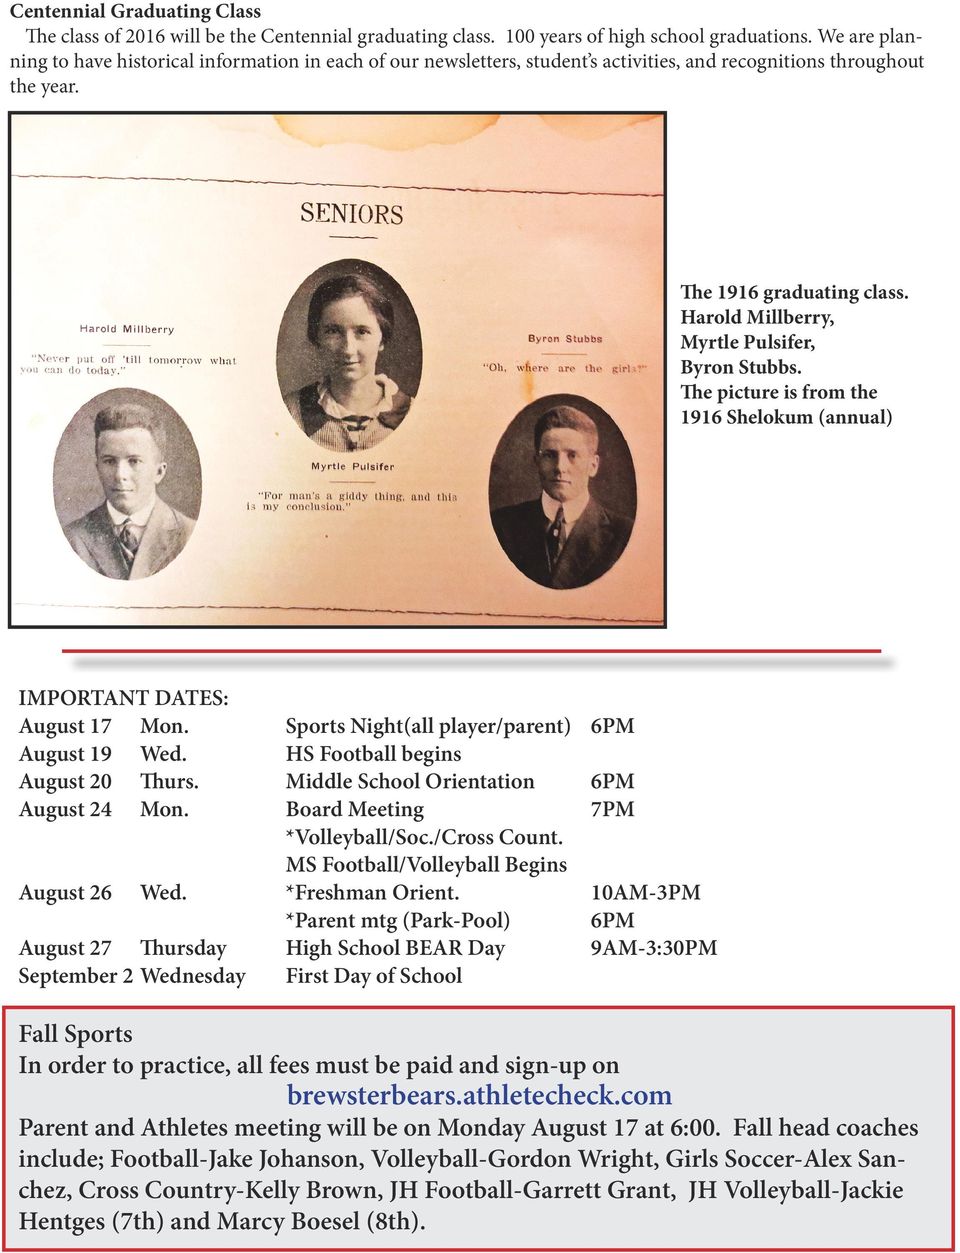 Harold Millberry, Myrtle Pulsifer, Byron Stubbs. The picture is from the 1916 Shelokum (annual) IMPORTANT DATES: August 17 Mon. Sports Night(all player/parent) 6PM August 19 Wed.